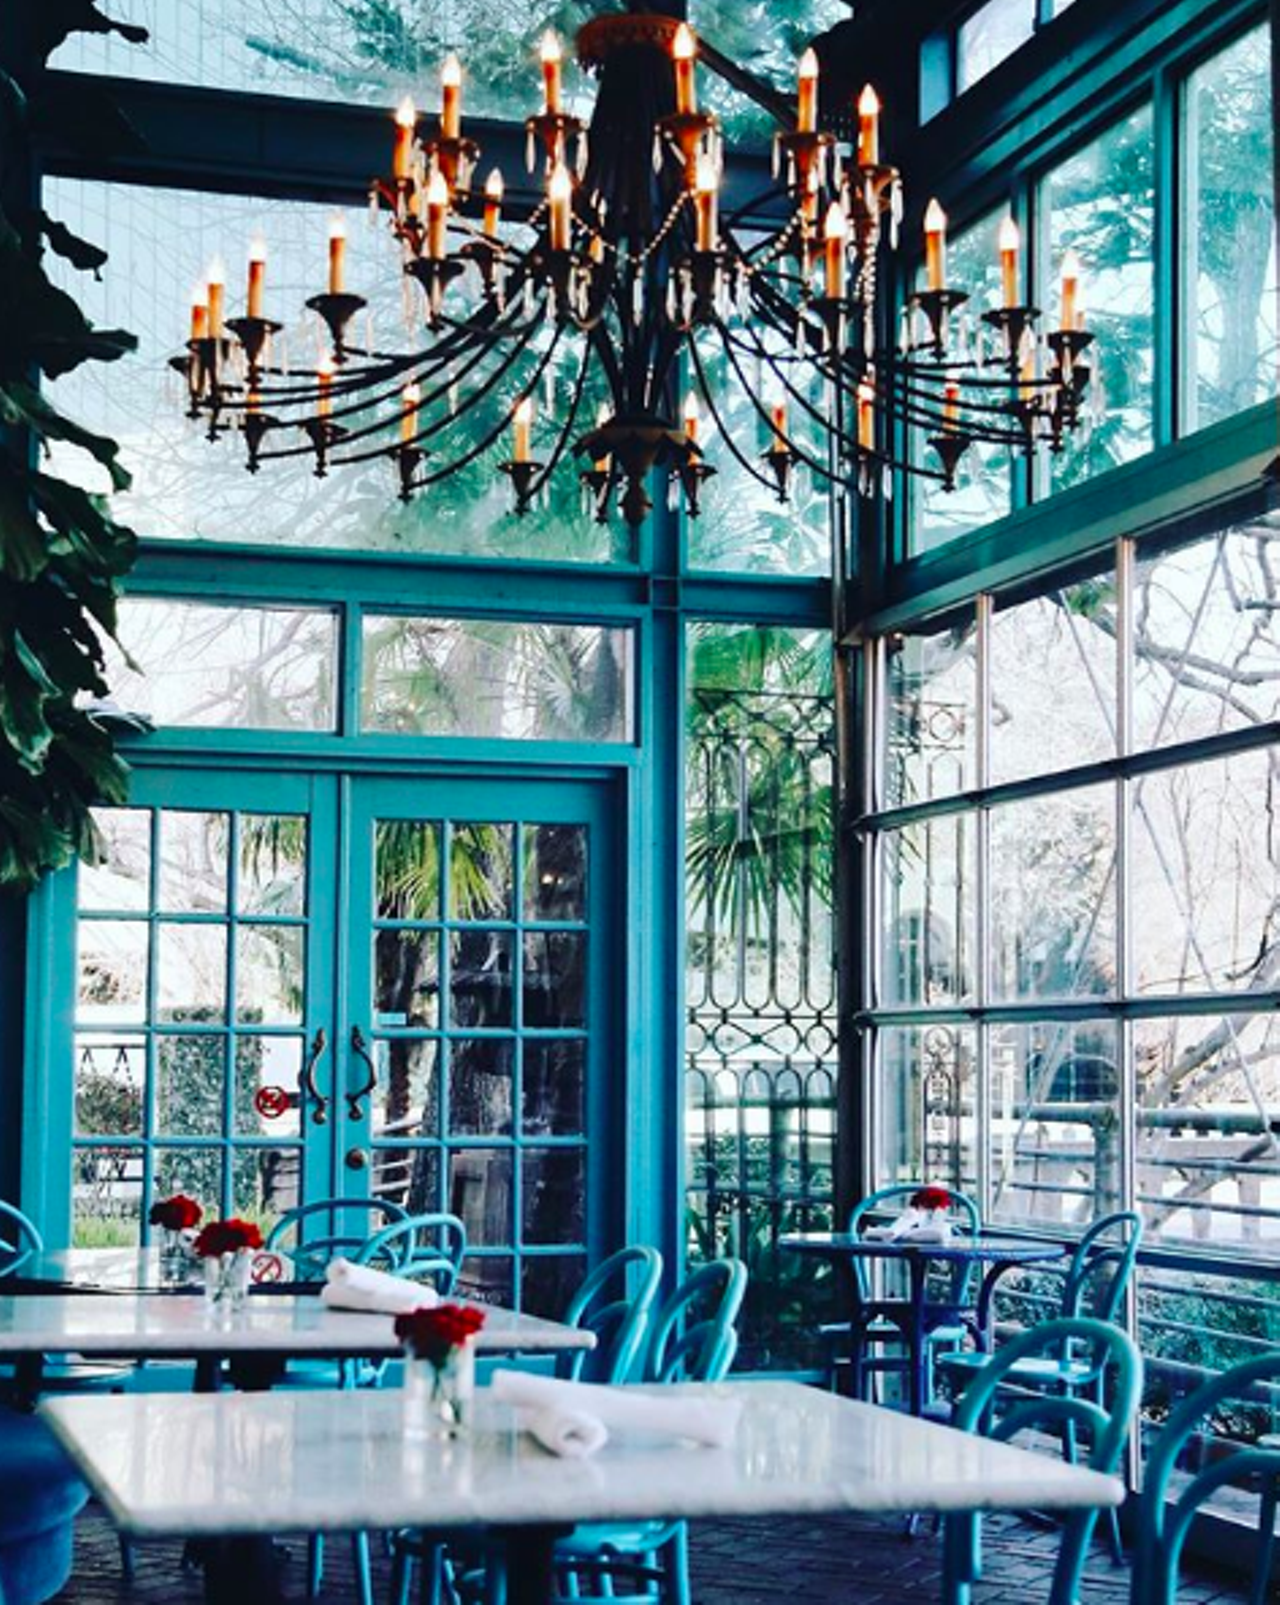 Hotel Havana
1015 Navarro St, havanasanantonio.com
Hotel Havana is, hands-down, strikingly gorgeous all-around. From the lounge at Ocho to the underground Havana Bar to the Cuban-inspired guest rooms, everything about Hotel Havana has you feel like you’ve been transported to another era.
Photo by jackieleeyoung via Instagram / havanasanantonio